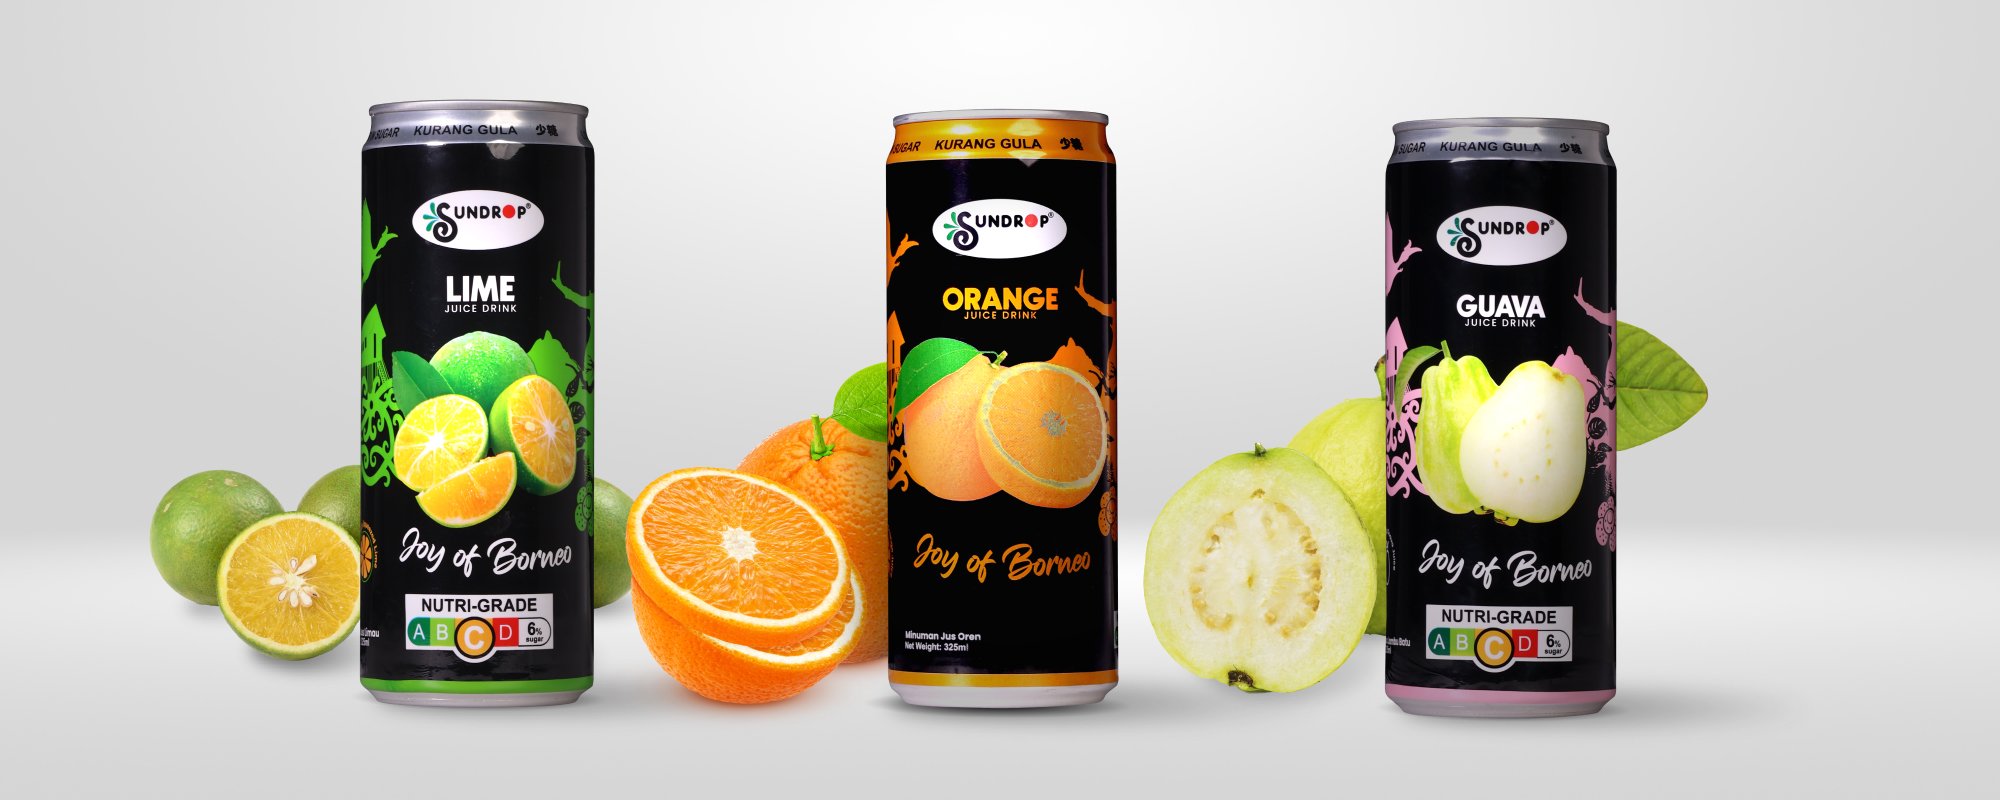 Sundrop juices products